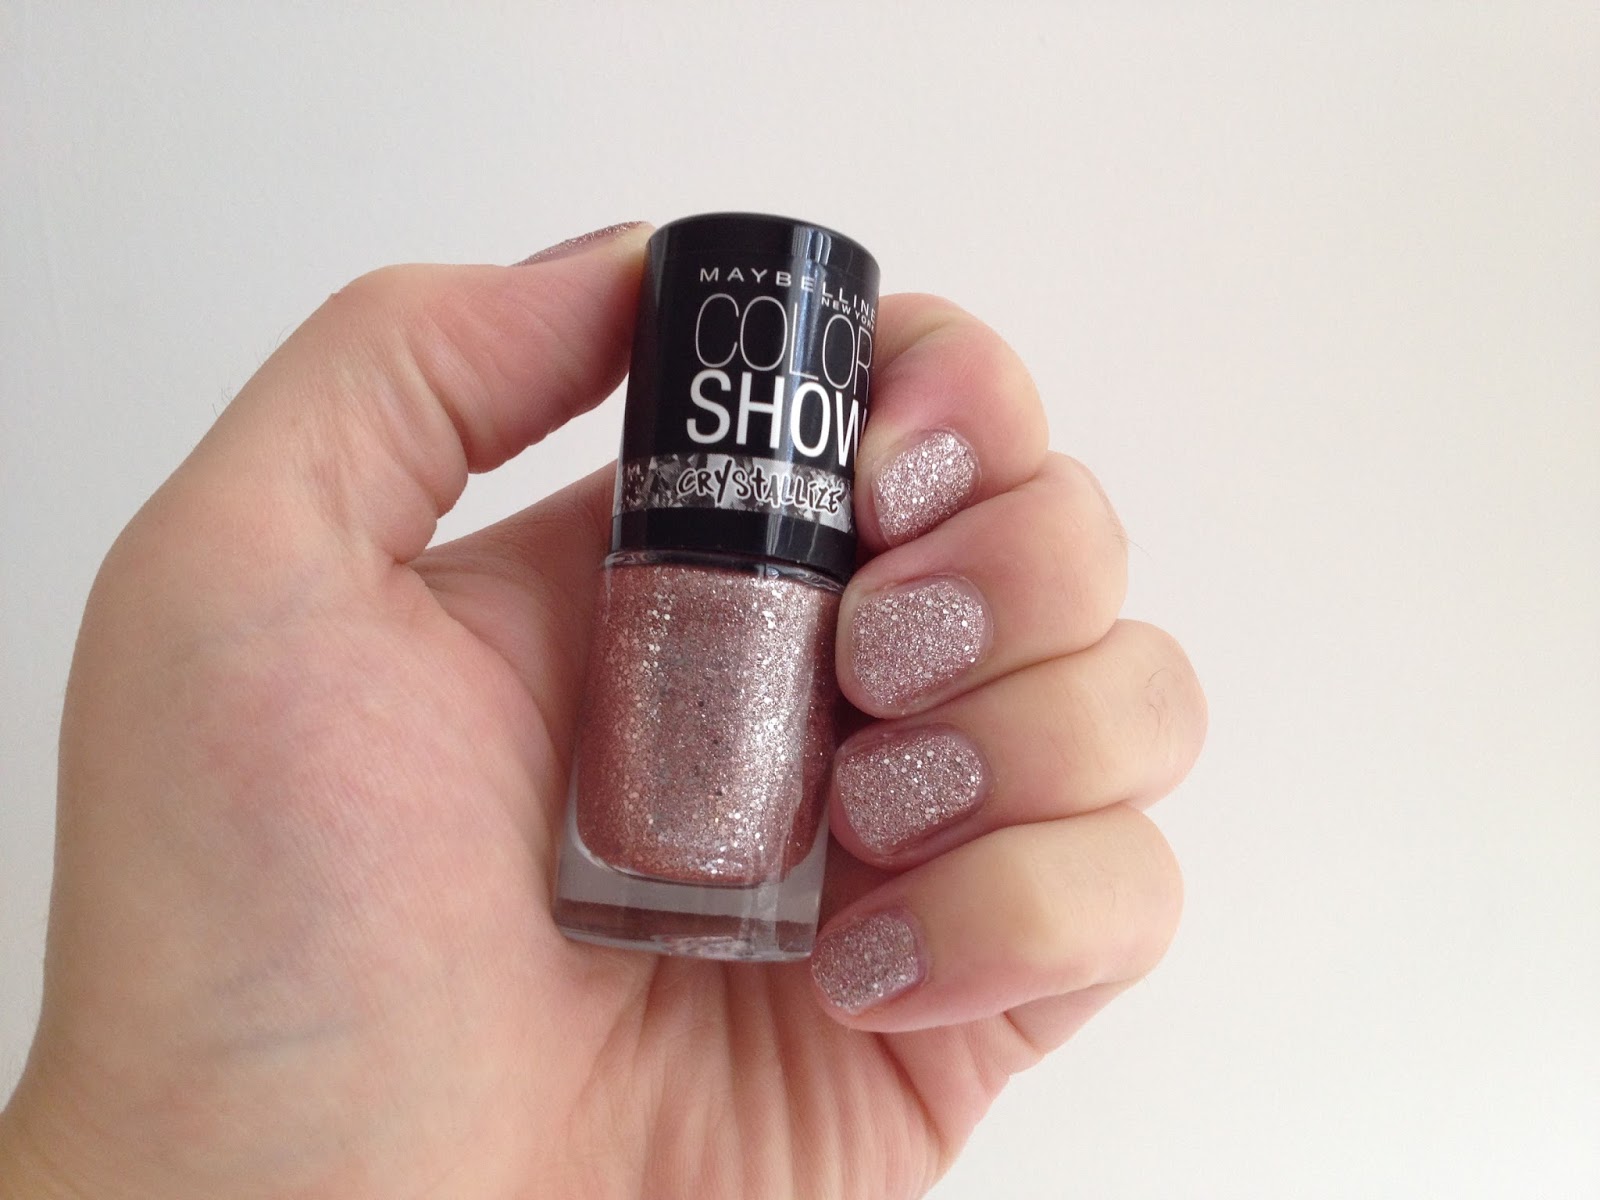 Maybelline Color Show Nail Polish in Sugar Crystals - wide 1